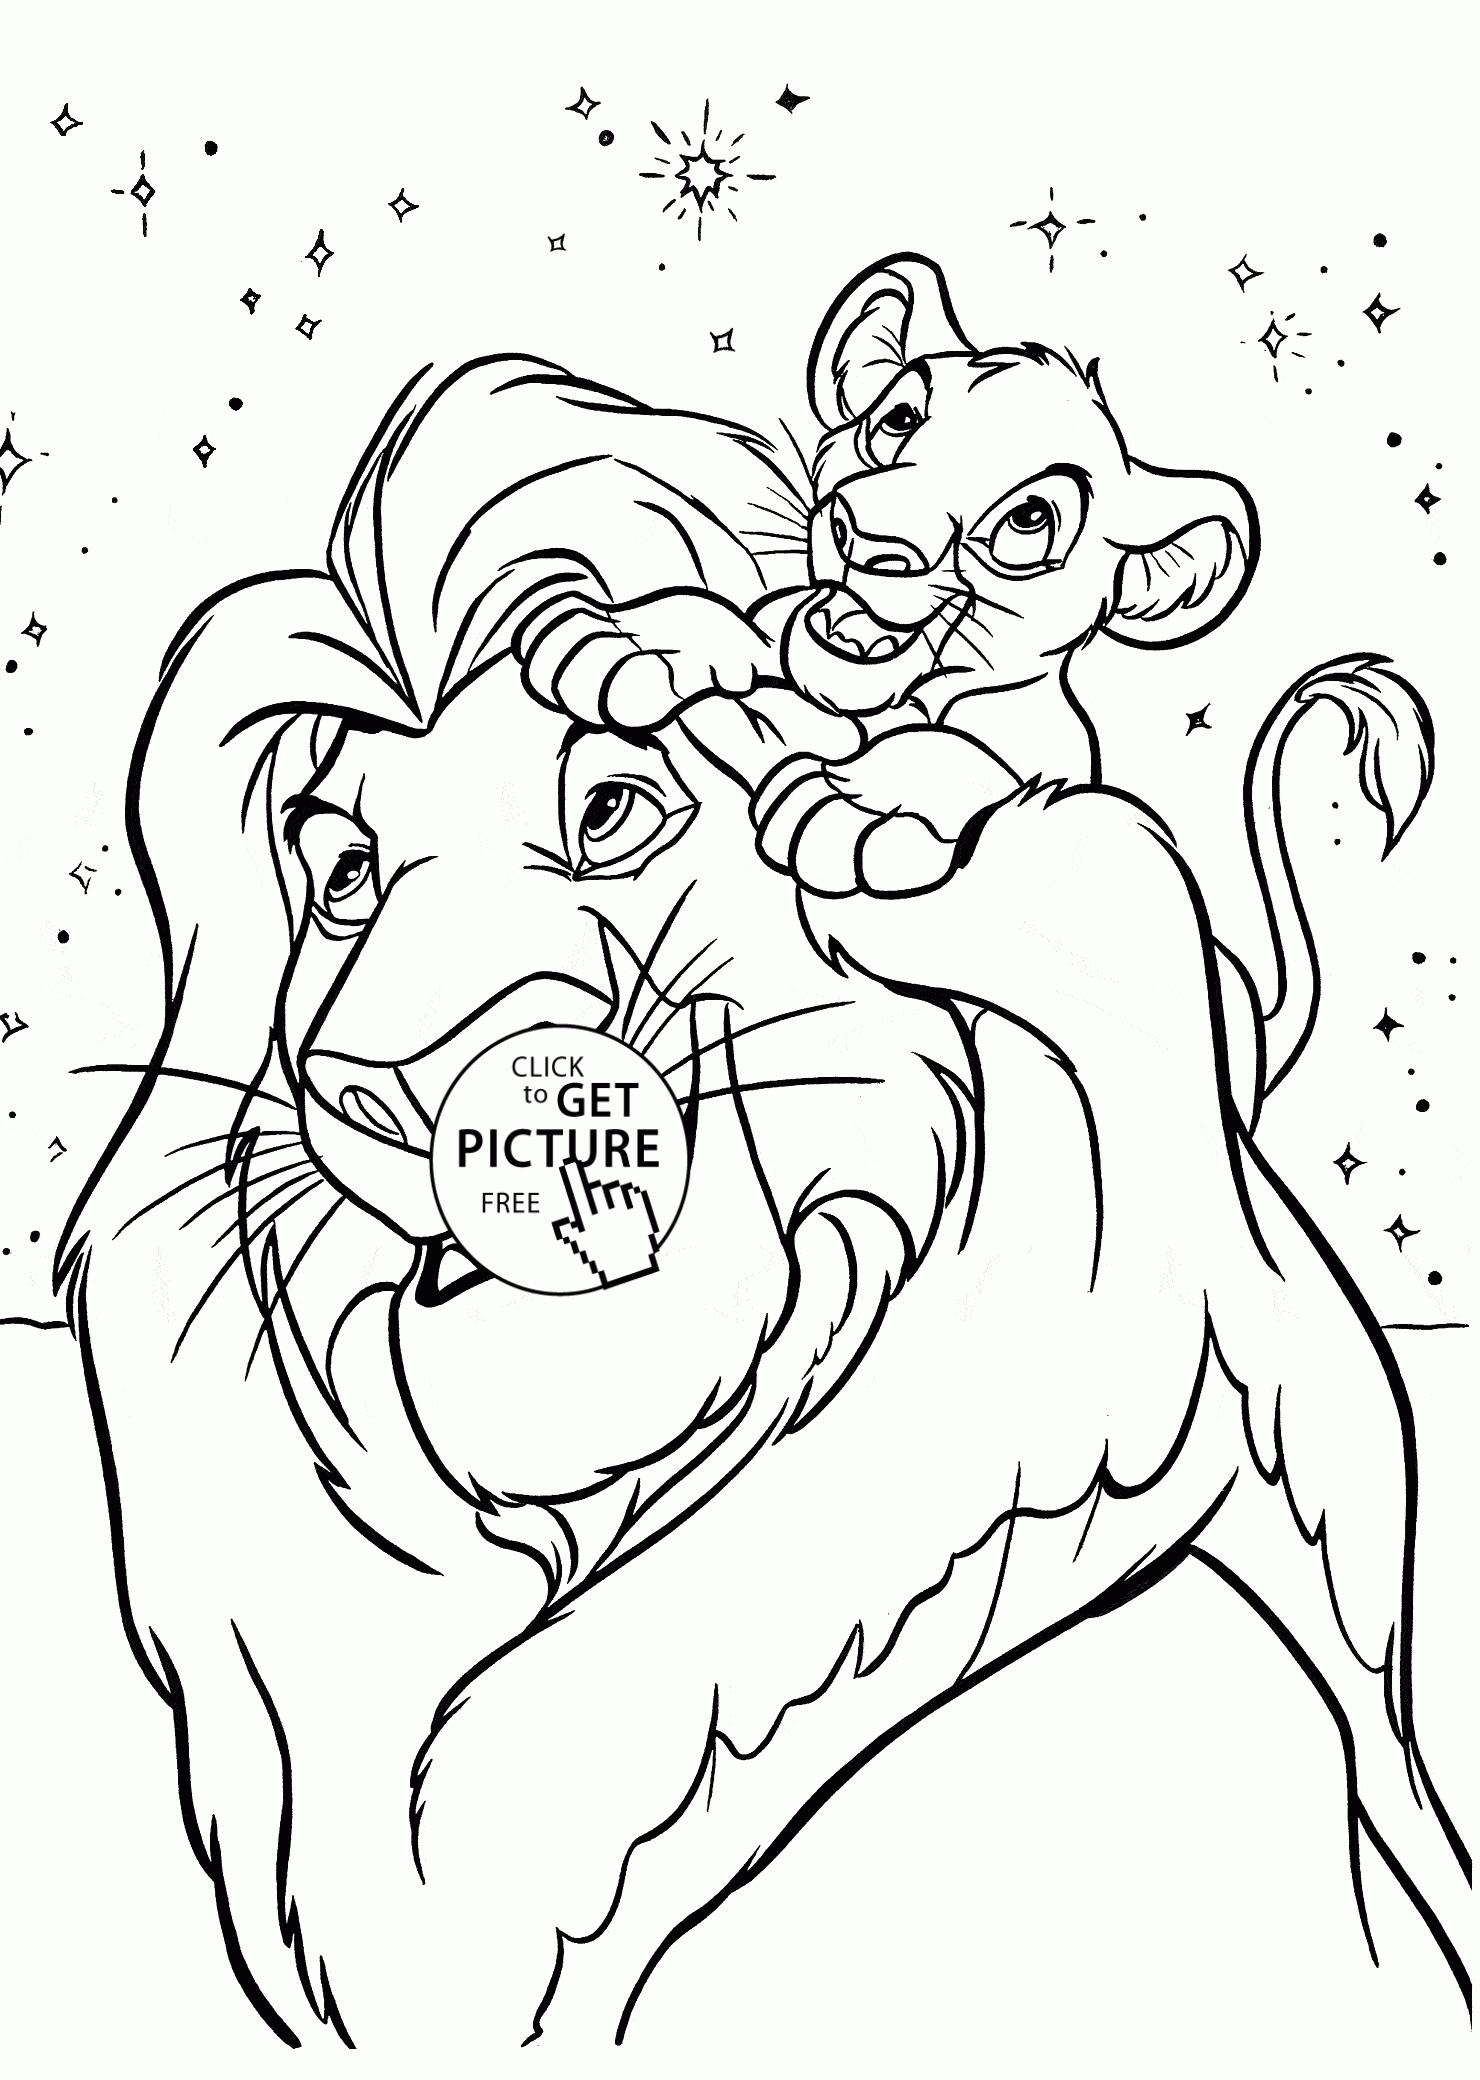 Lion King Coloring Page For Kids, Disney Coloring Pages Printables - Free Printable Disney Coloring Pages